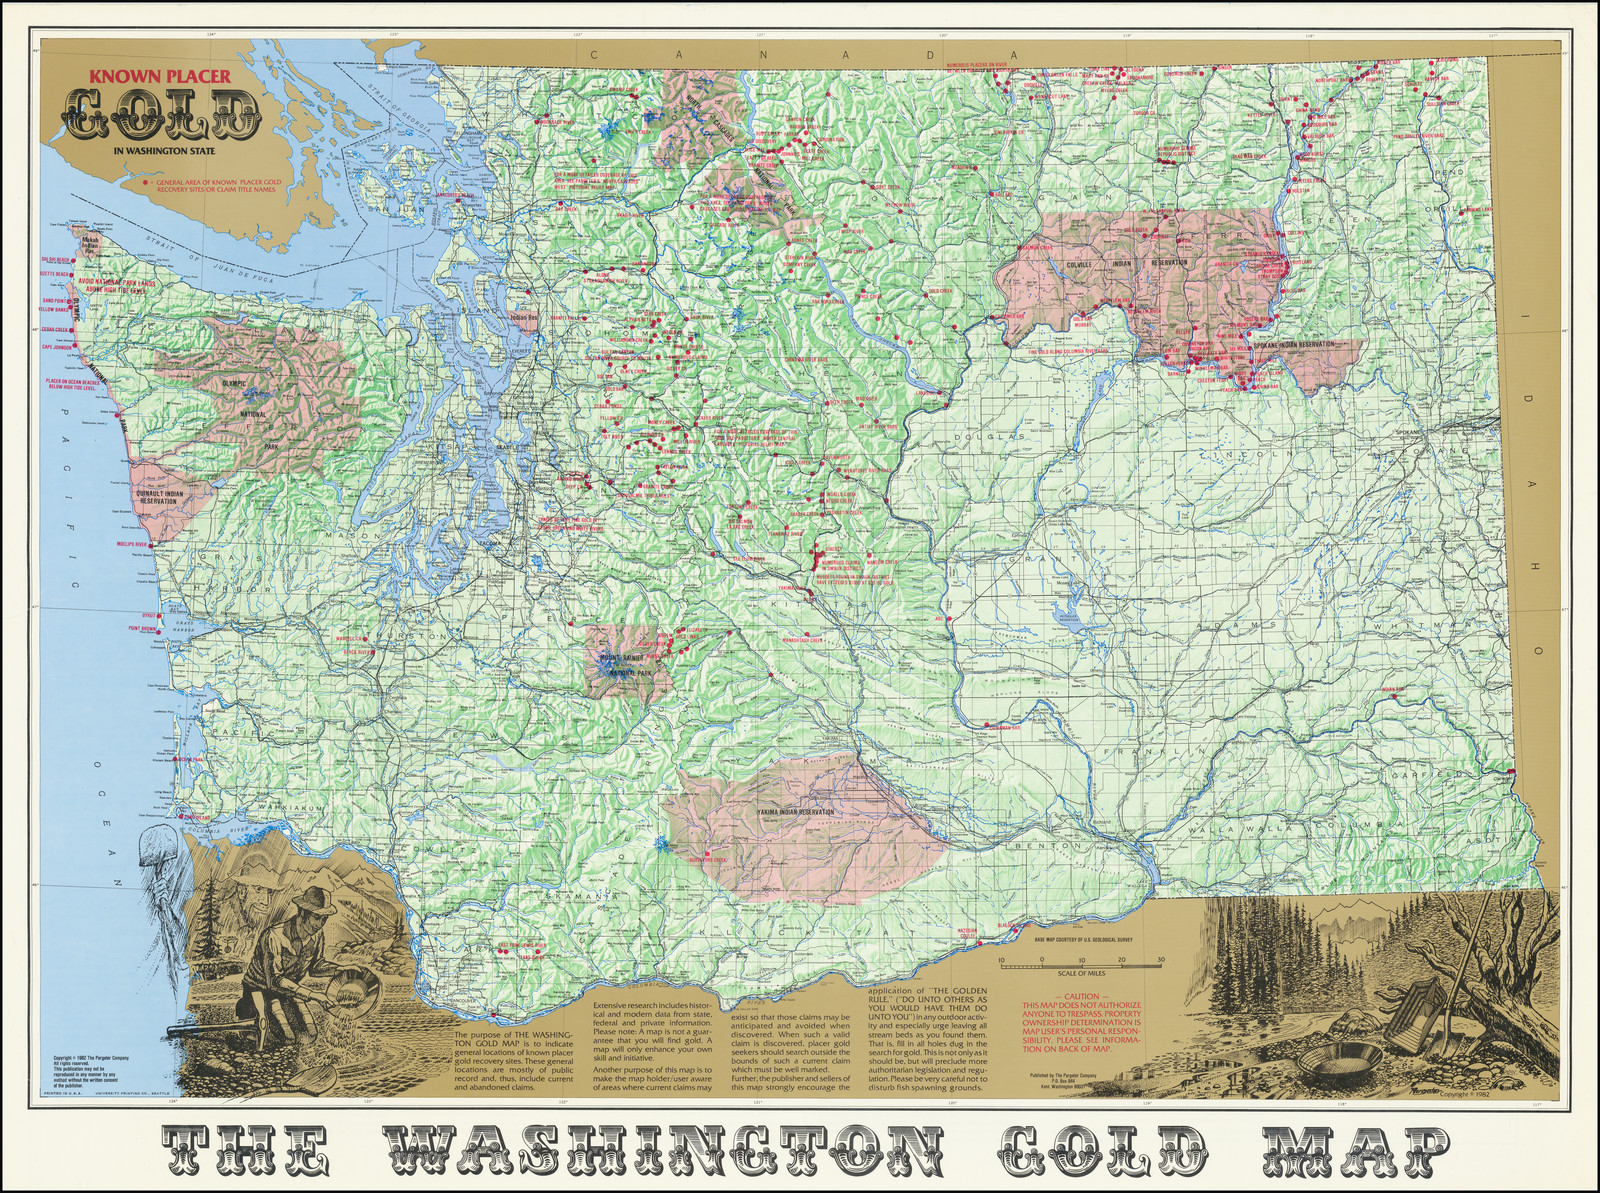 Gold Fields Locations in WA so You Can Find Gold